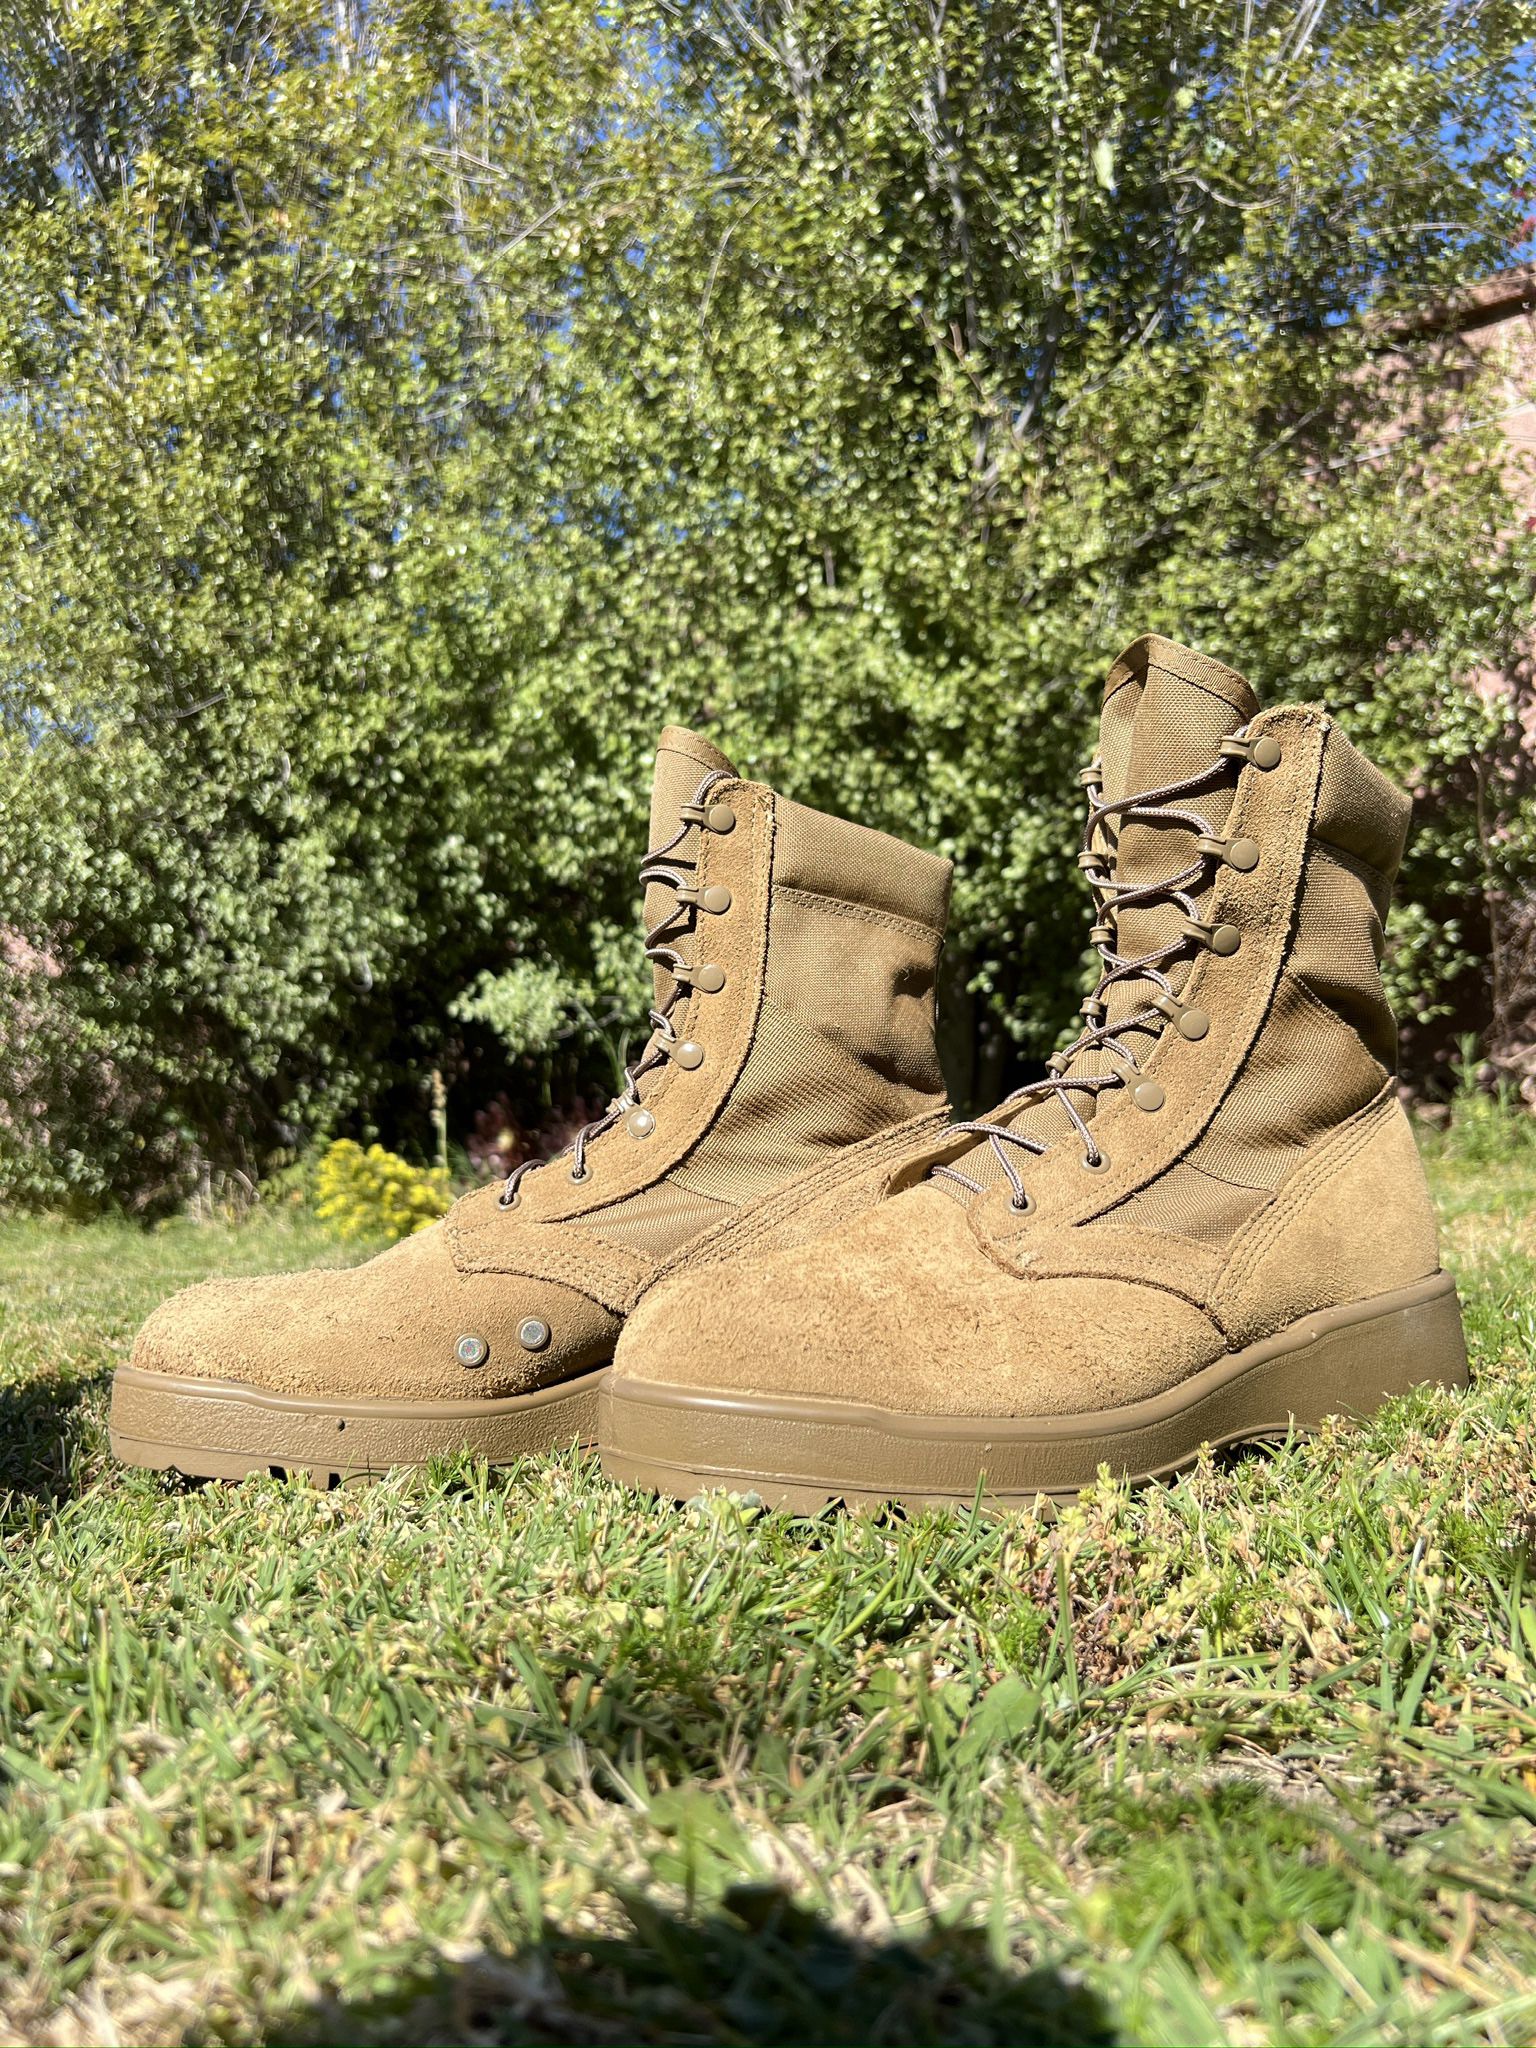 US Military Army Combat Boot (Hot Weather), Coyote, Size 10W